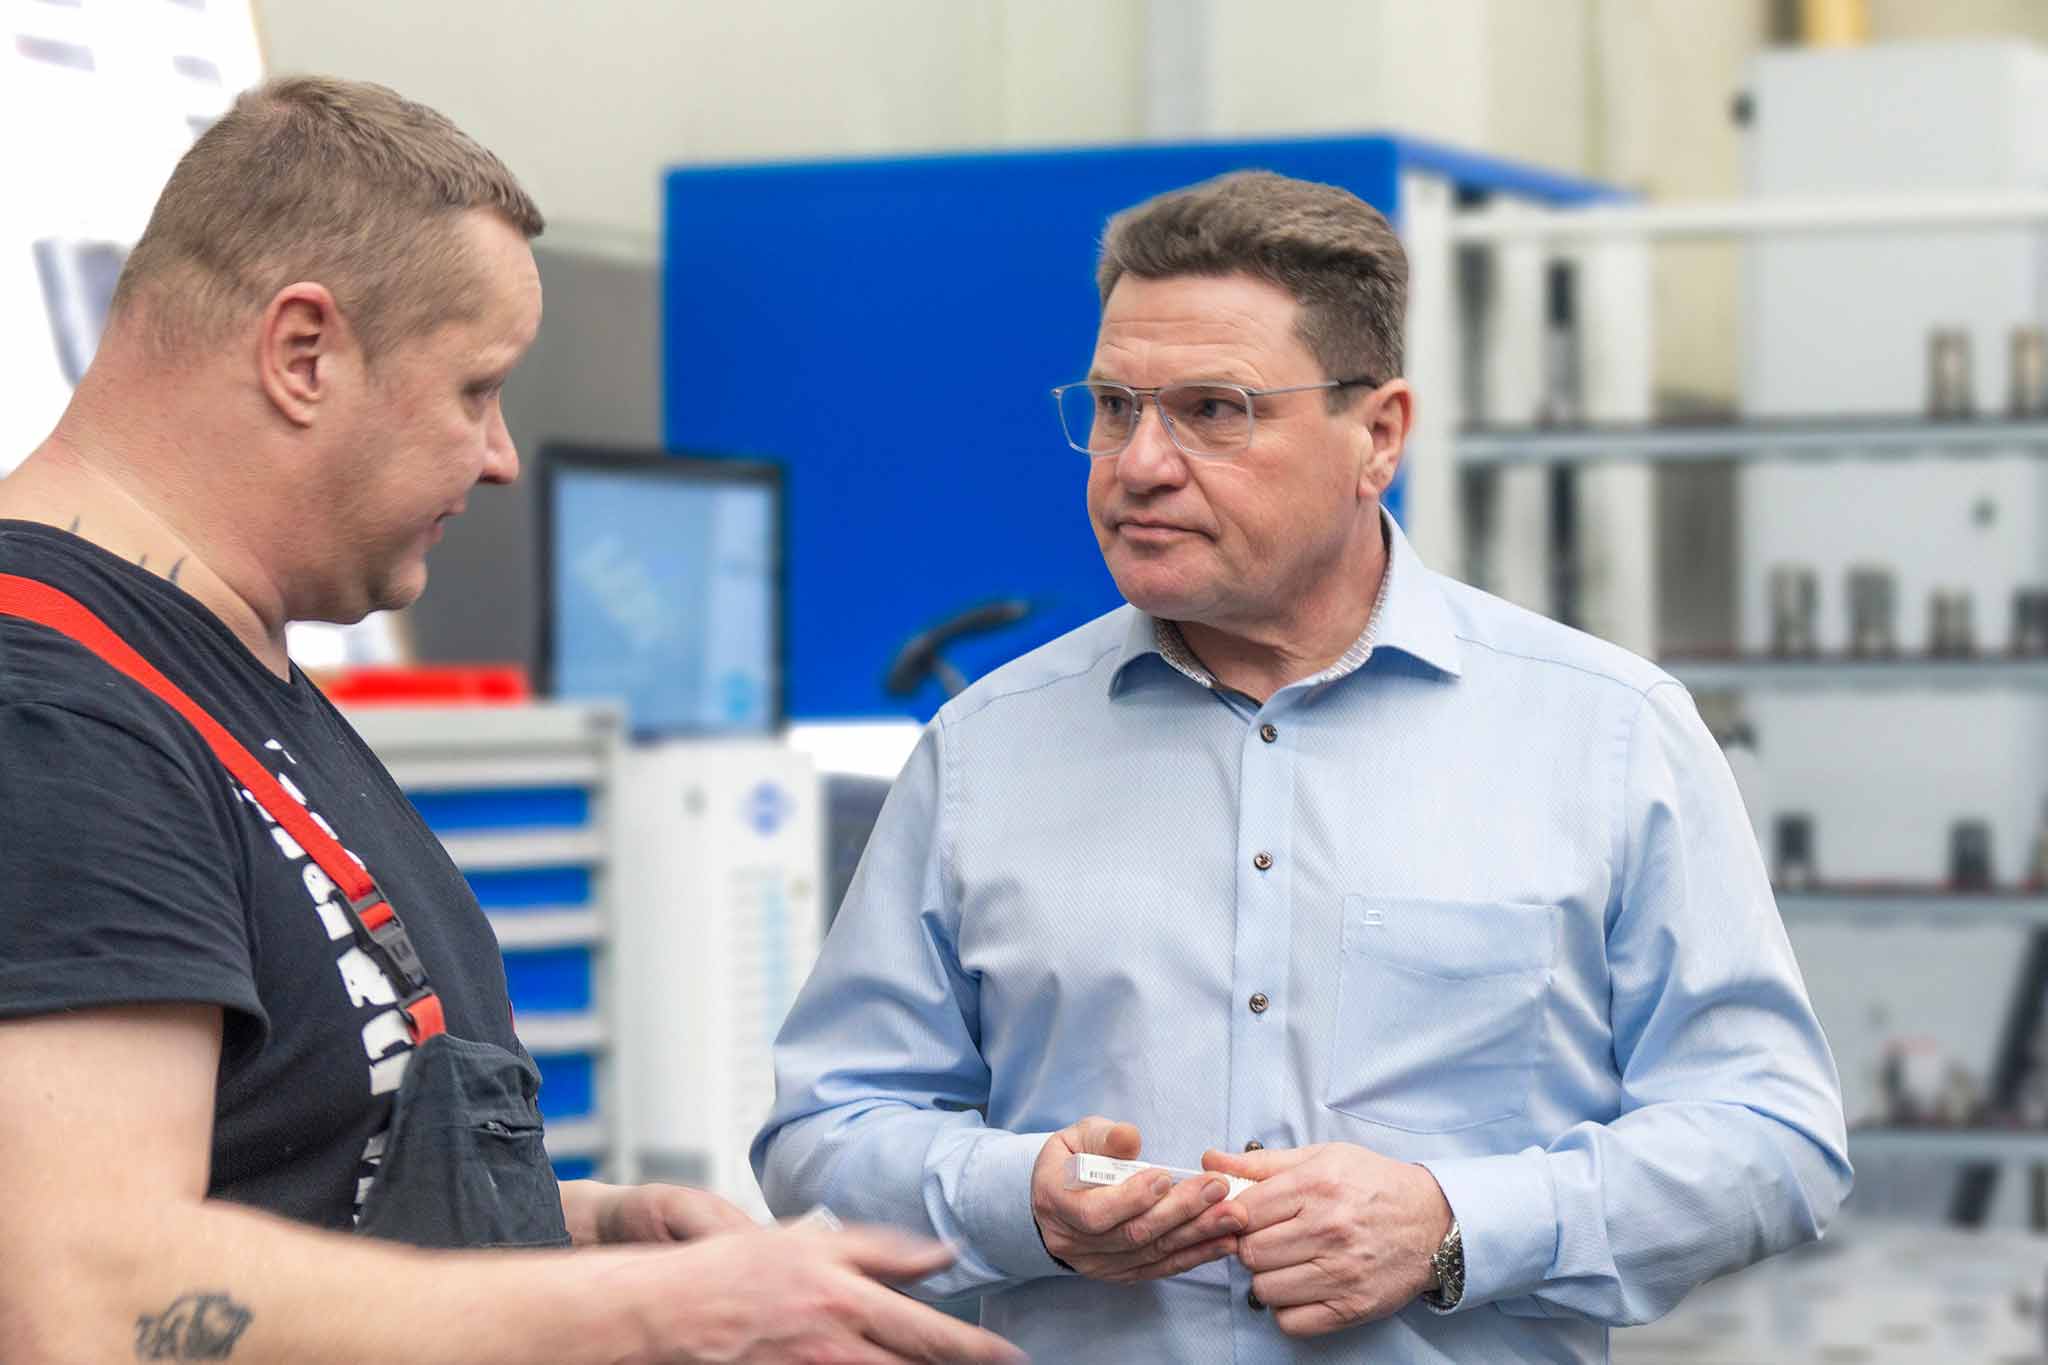 David Frommhold from Walter Formenbau speaking to MAPAL consultant Alfred Baur in the manufacturing area. The UNIBASE-M is shown in the background.